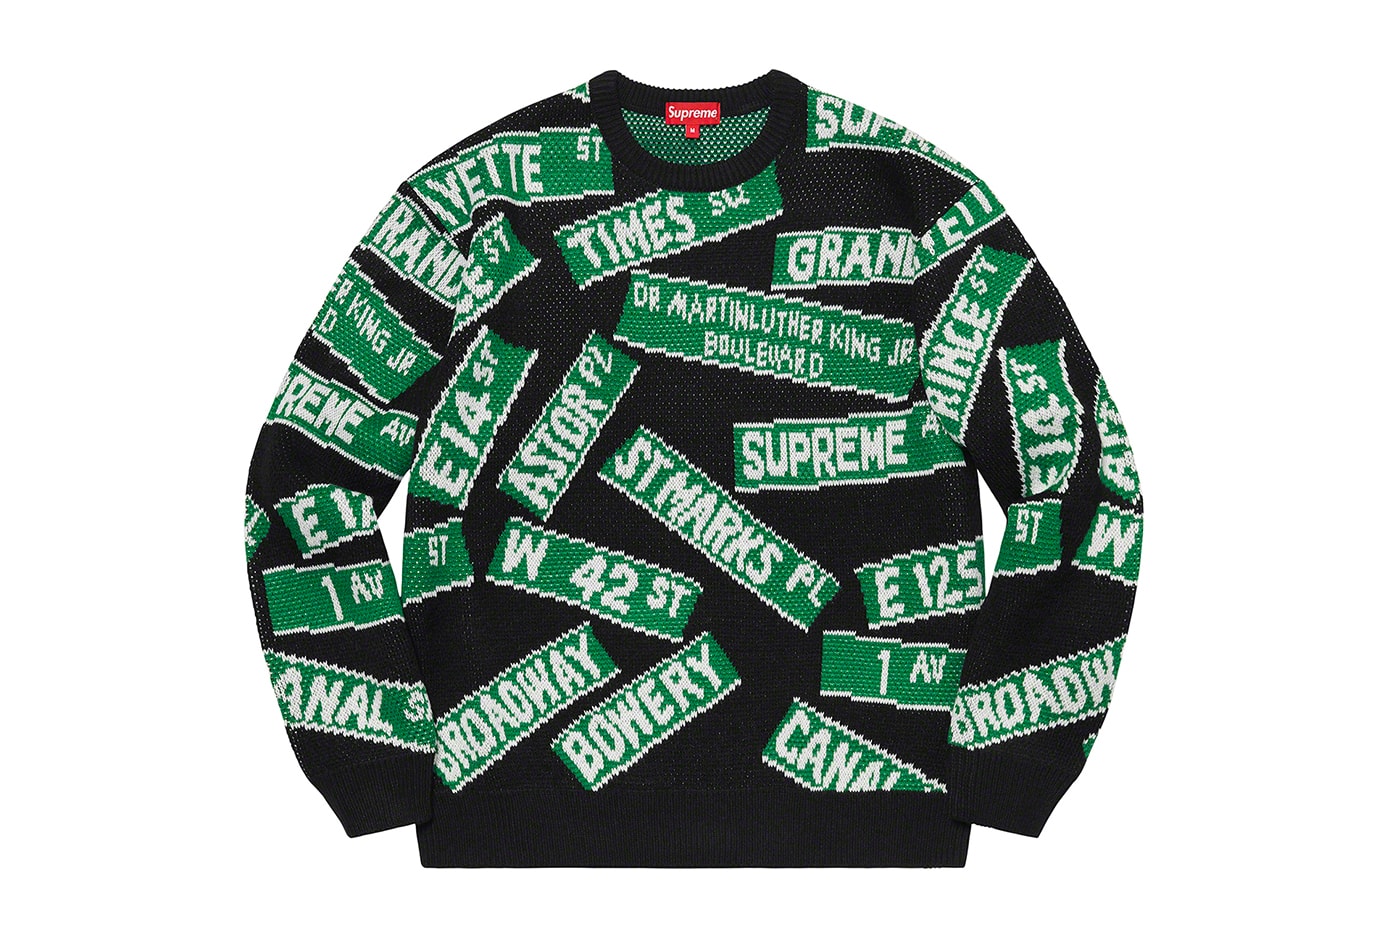 Supreme Spring/Summer 2021 Tops Shirts Notorious BIG  Nick Knight  Clayton Patterson  Mitchell & Ness NYC New York 